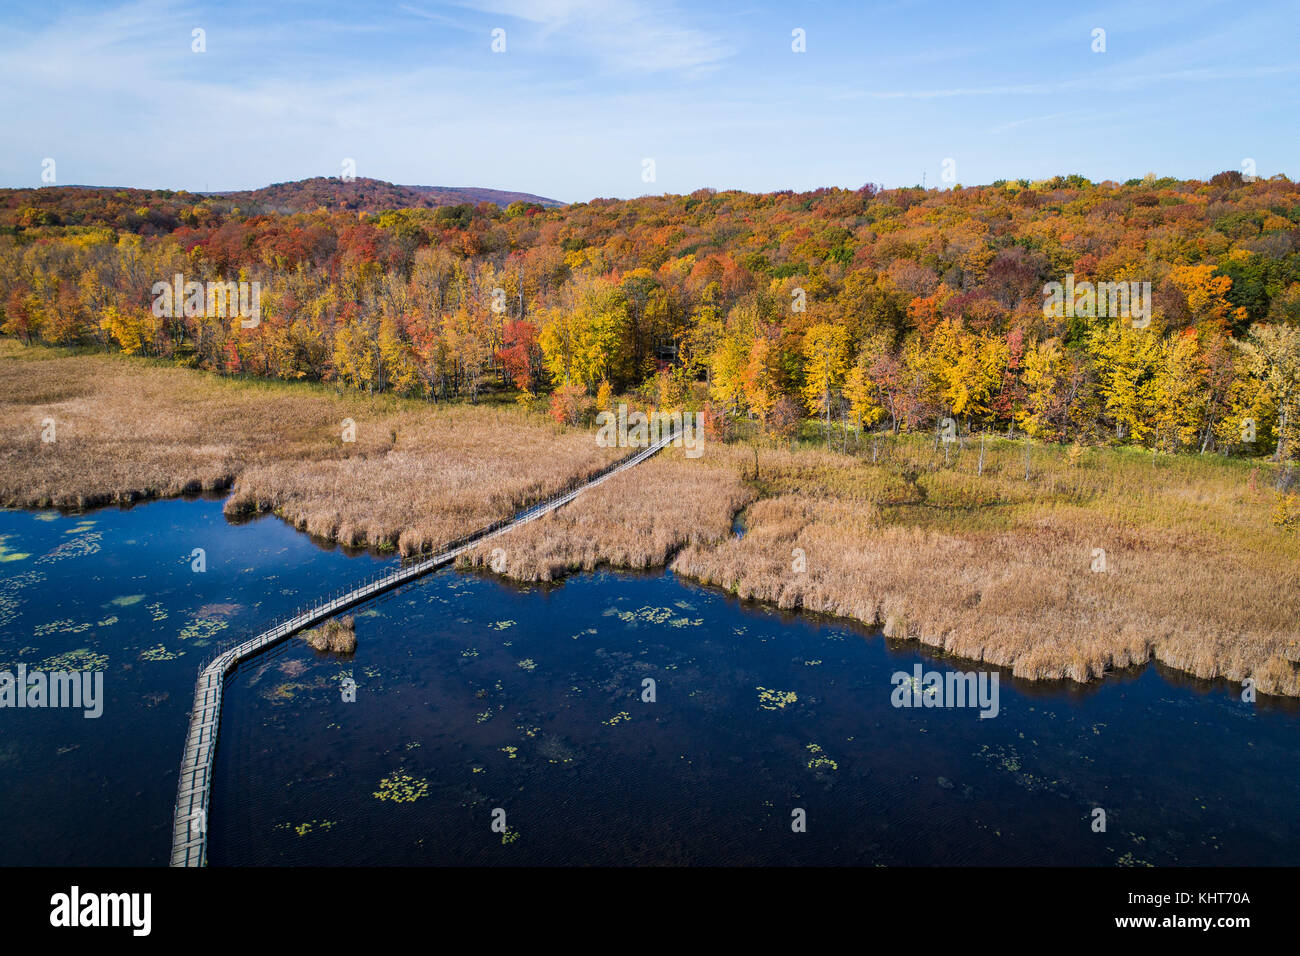 Aerial view over forest and mash during autumn vibrant colors Stock Photo